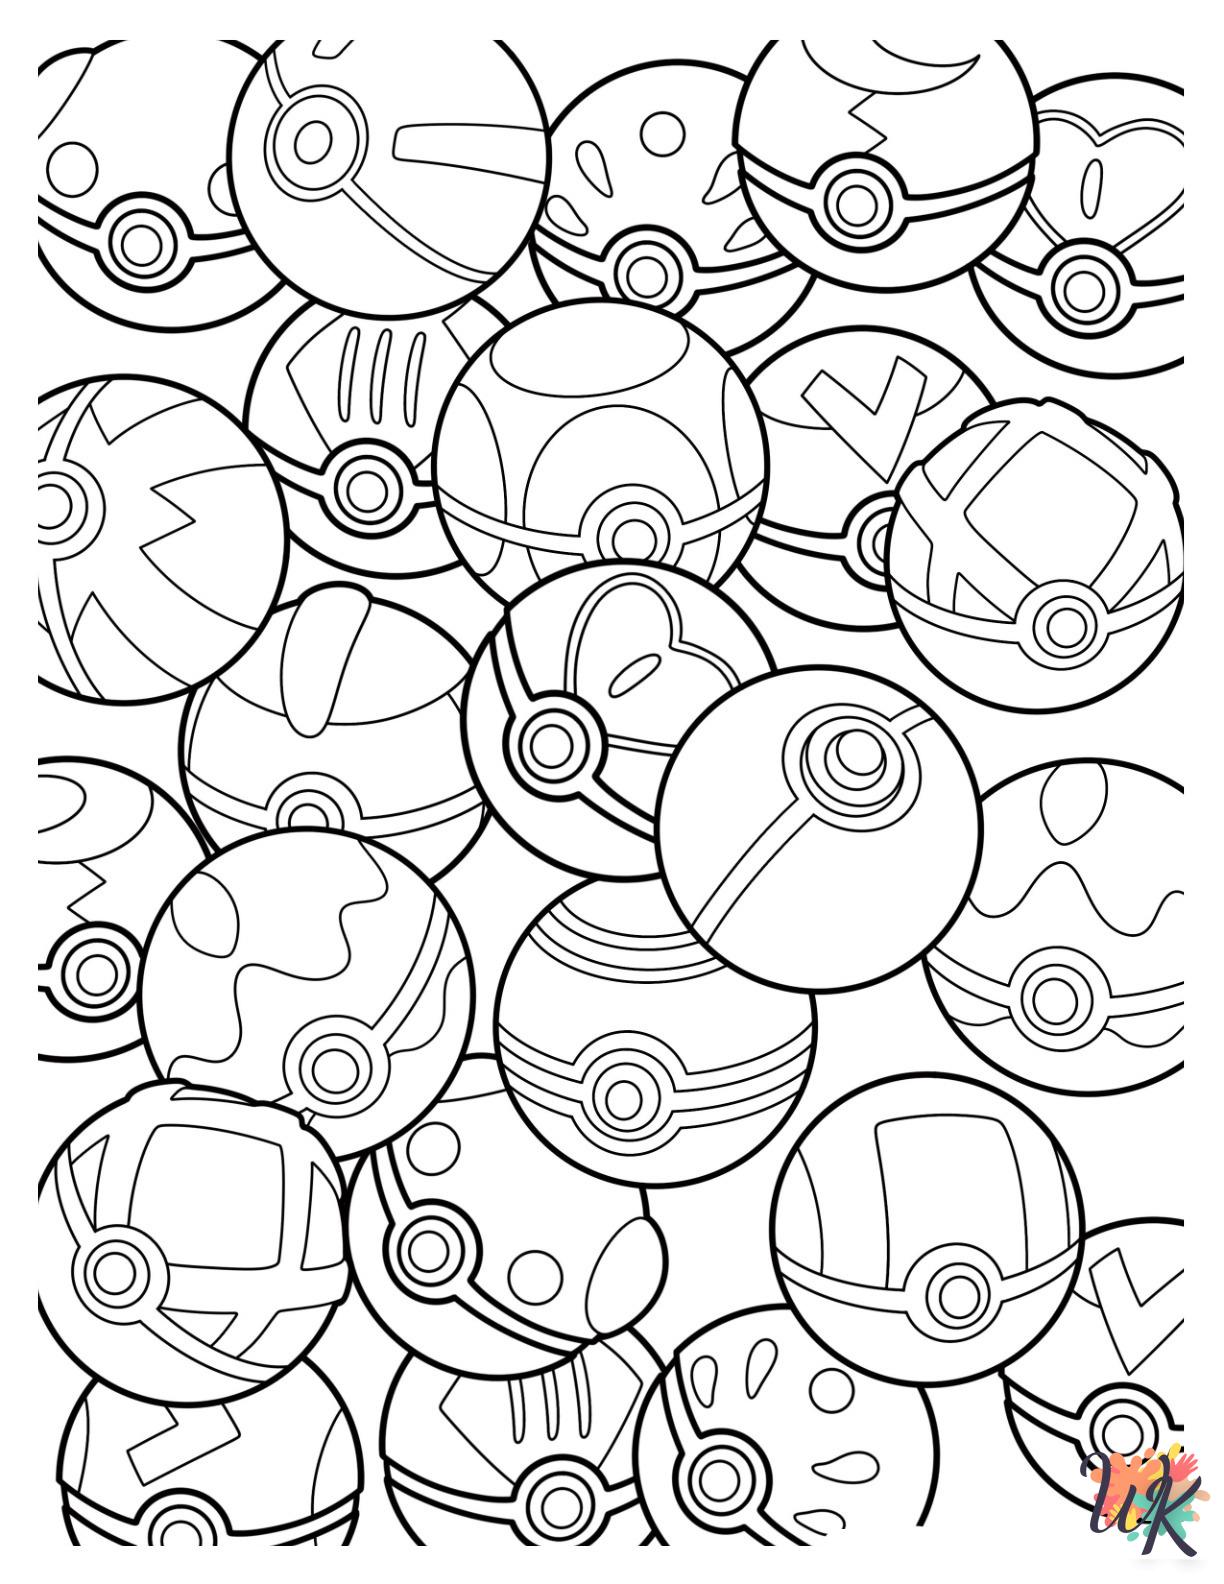 Pokeball coloring pages to print